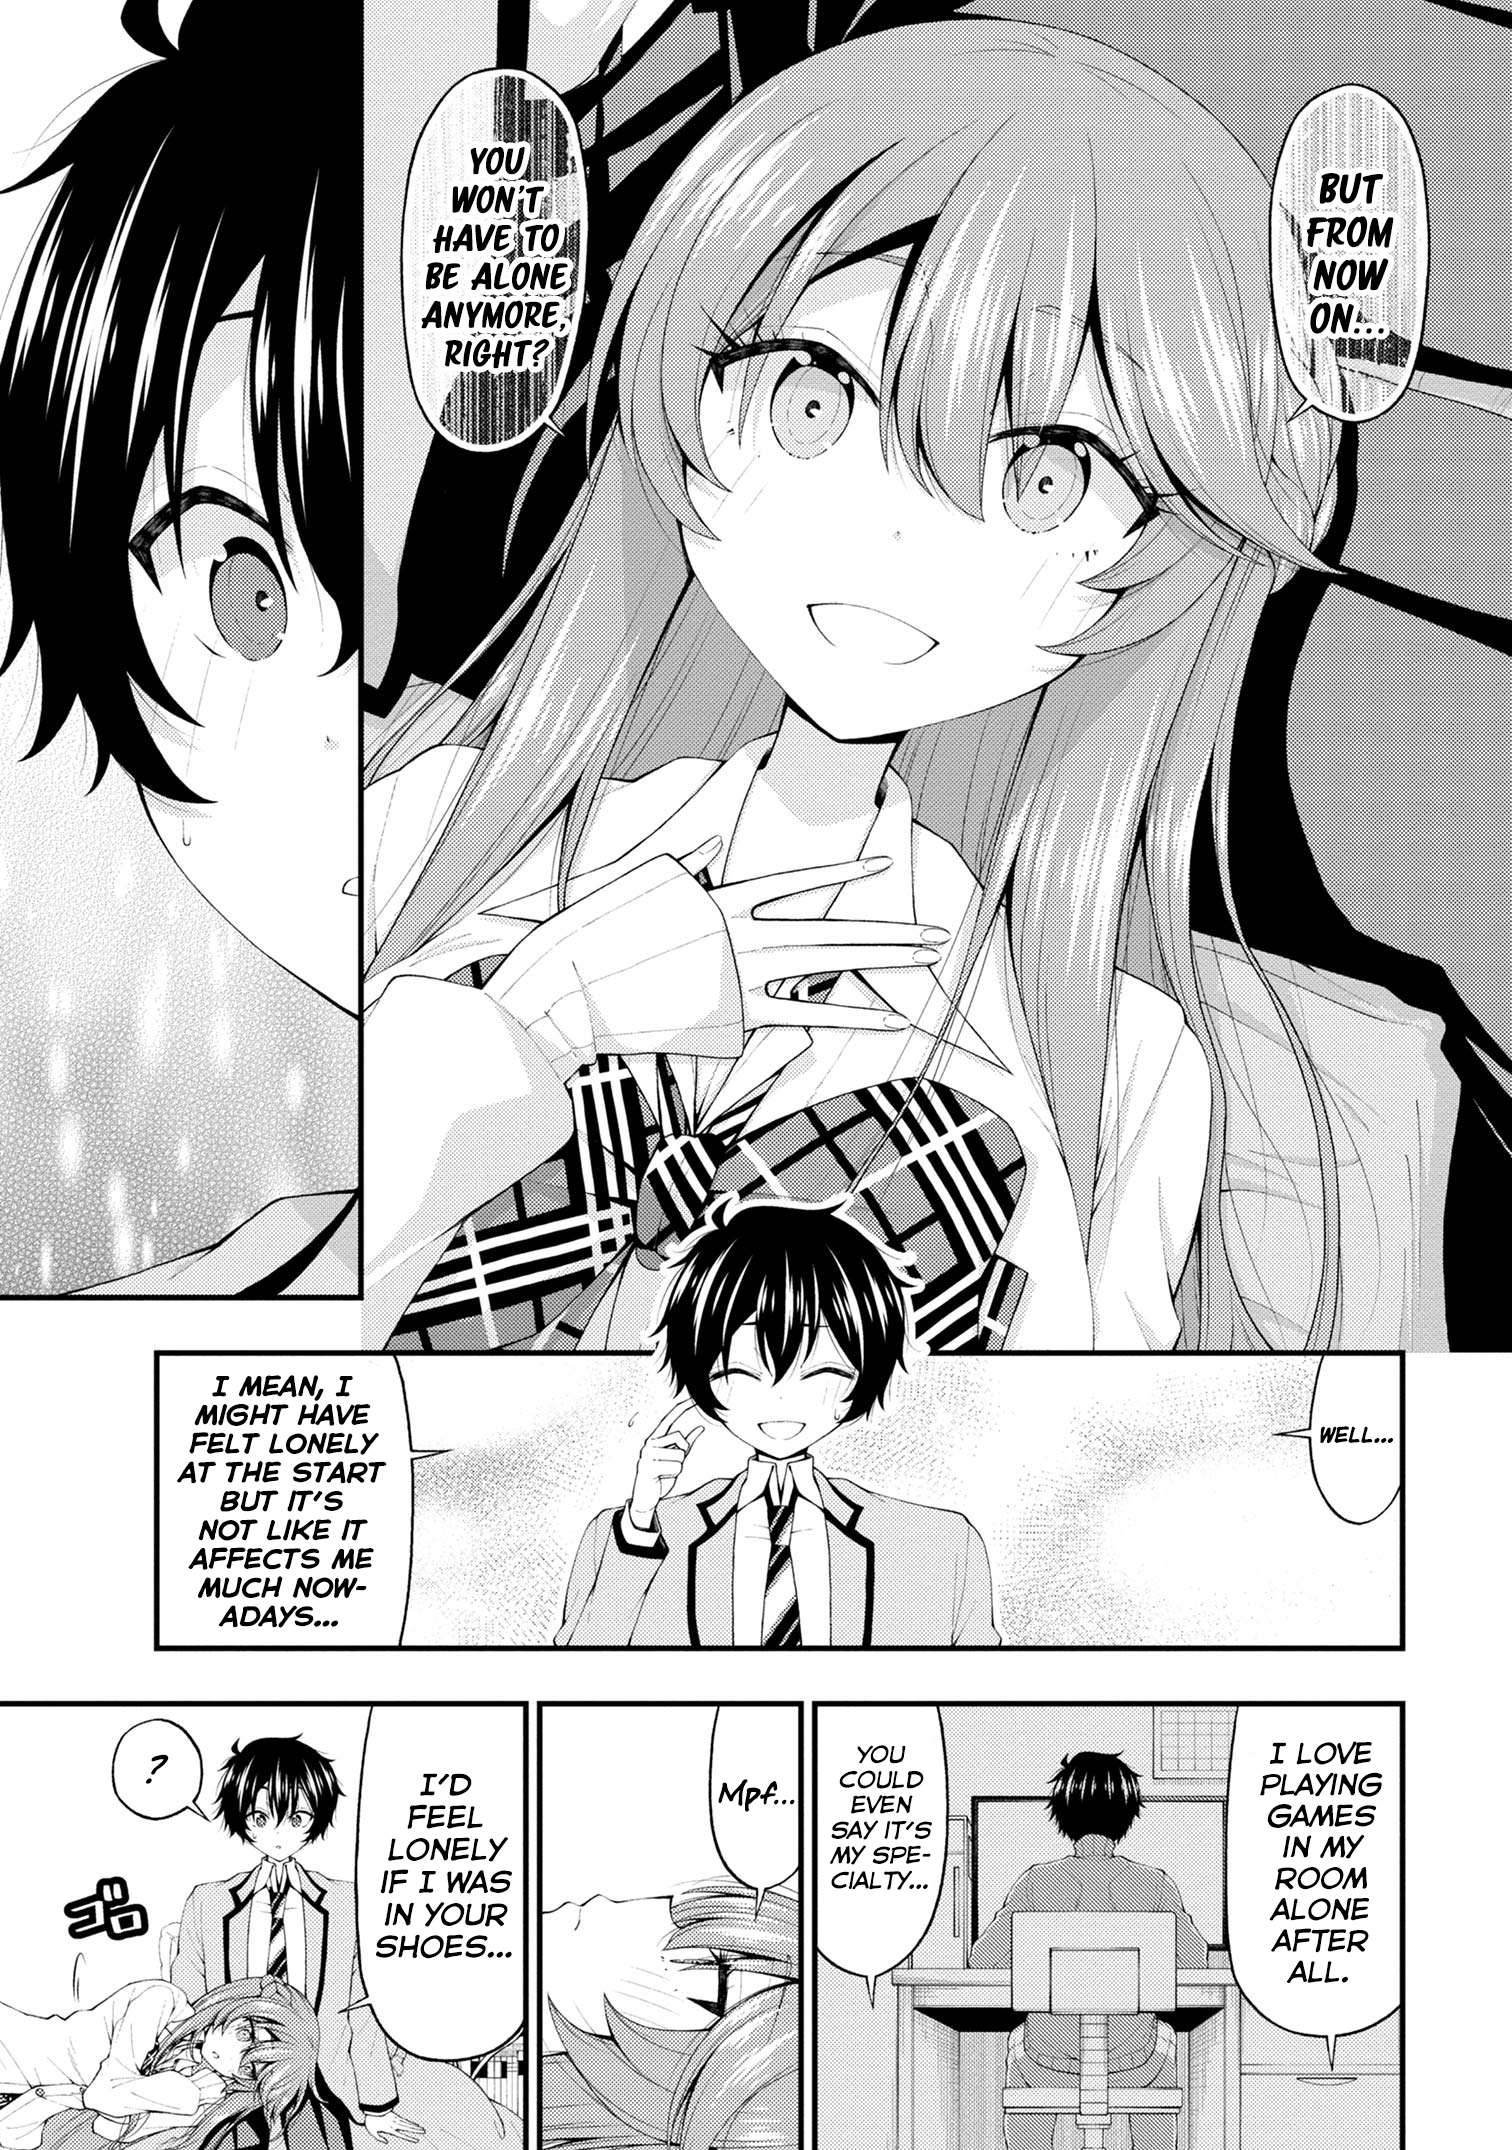 The Gal Who Was Meant to Confess to Me as a Game Punishment - chapter 17 - #6